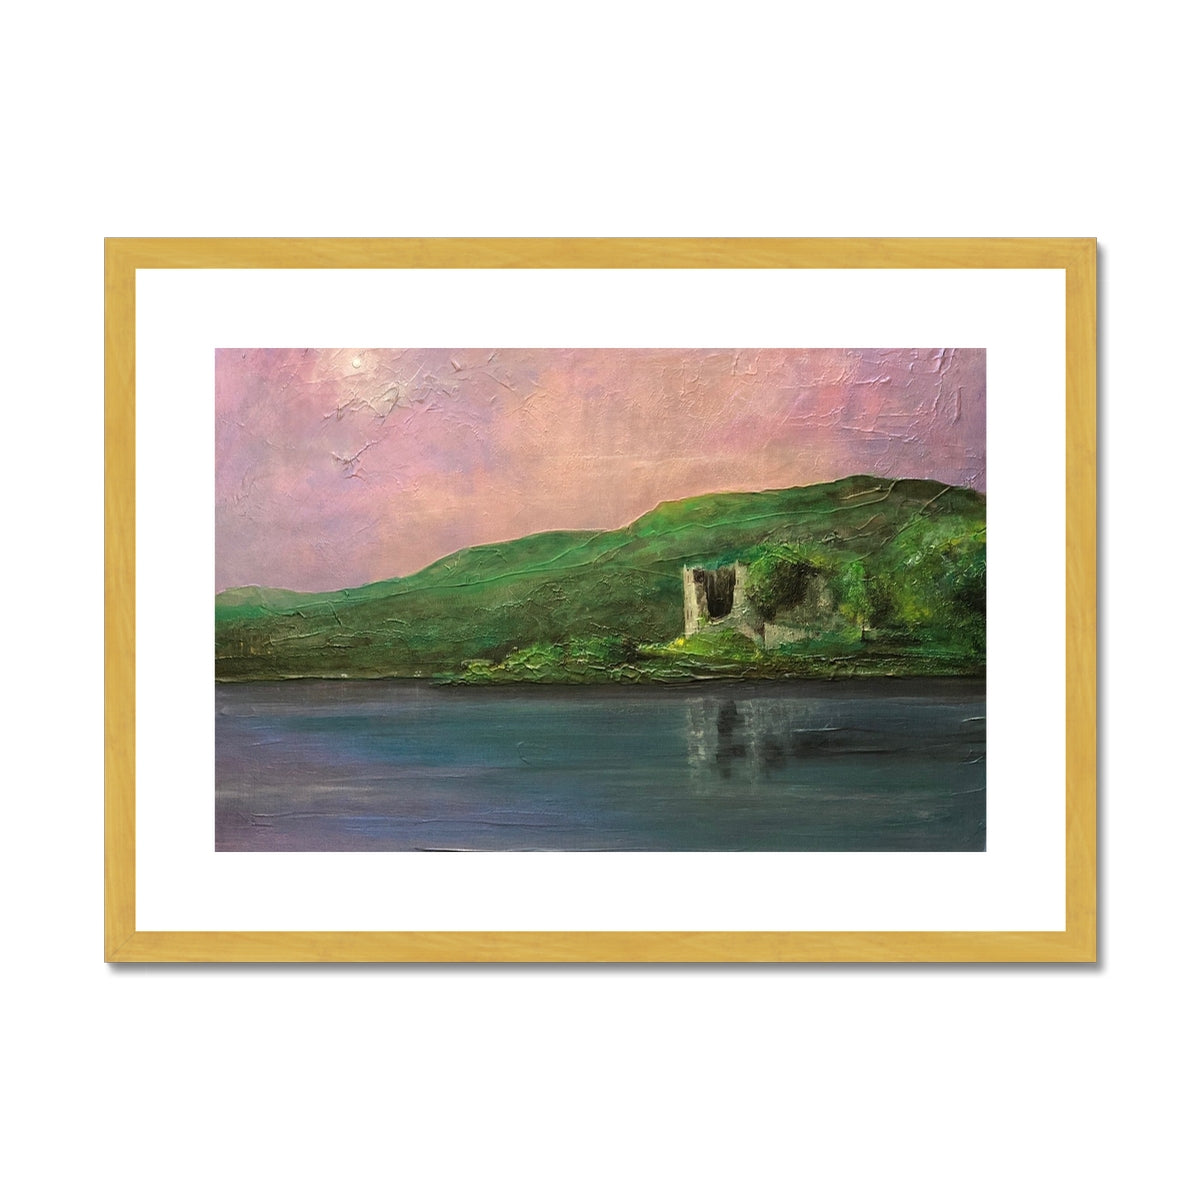 Old Castle Lachlan Painting | Antique Framed & Mounted Prints From Scotland-Antique Framed & Mounted Prints-Historic & Iconic Scotland Art Gallery-A2 Landscape-Gold Frame-Paintings, Prints, Homeware, Art Gifts From Scotland By Scottish Artist Kevin Hunter